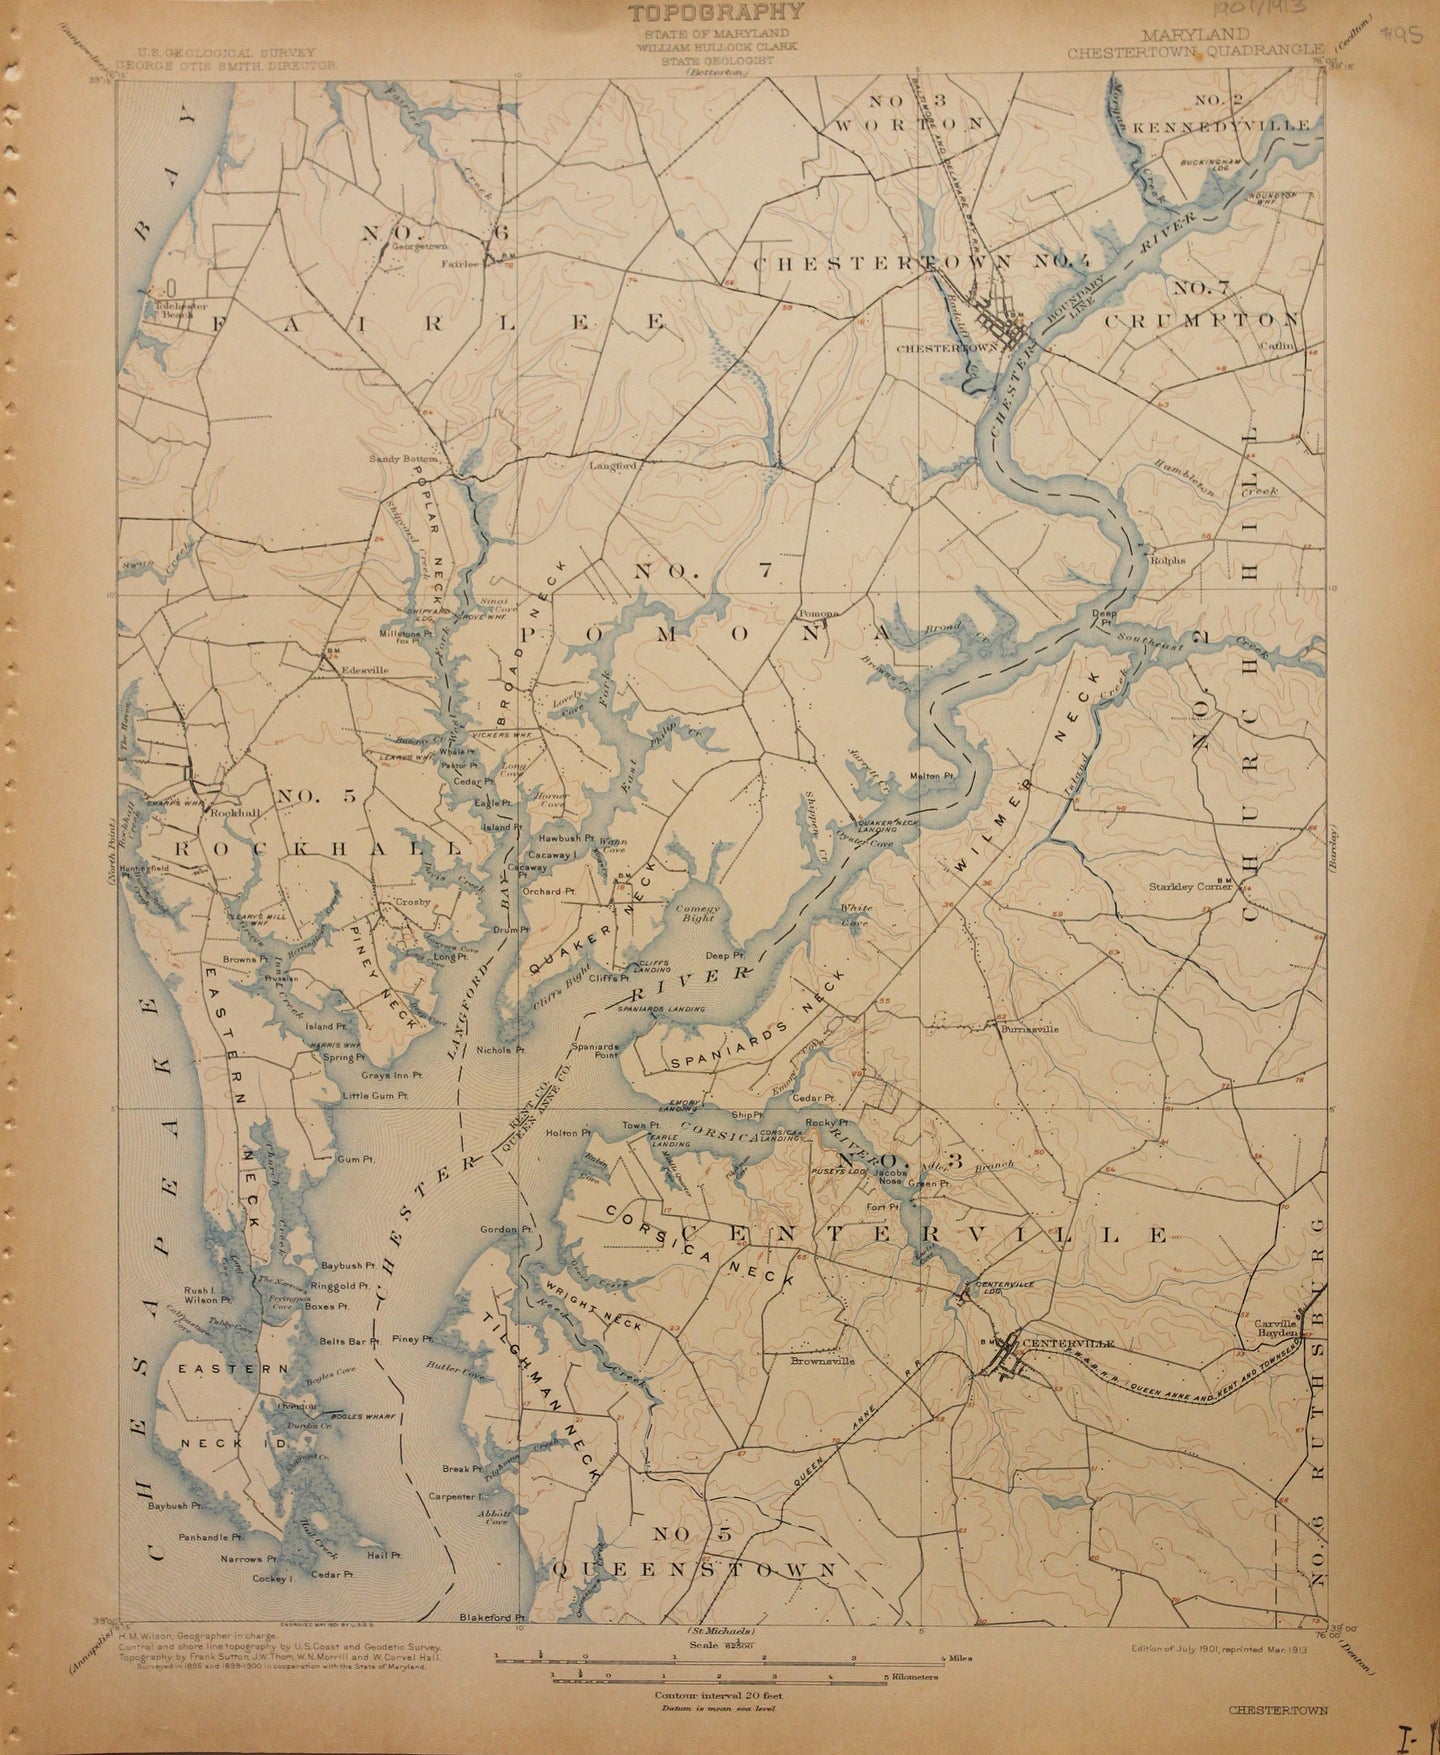 Genuine-Antique-Map-Chestertown--Maryland--1913-U-S-Geological-Survey--Maps-Of-Antiquity